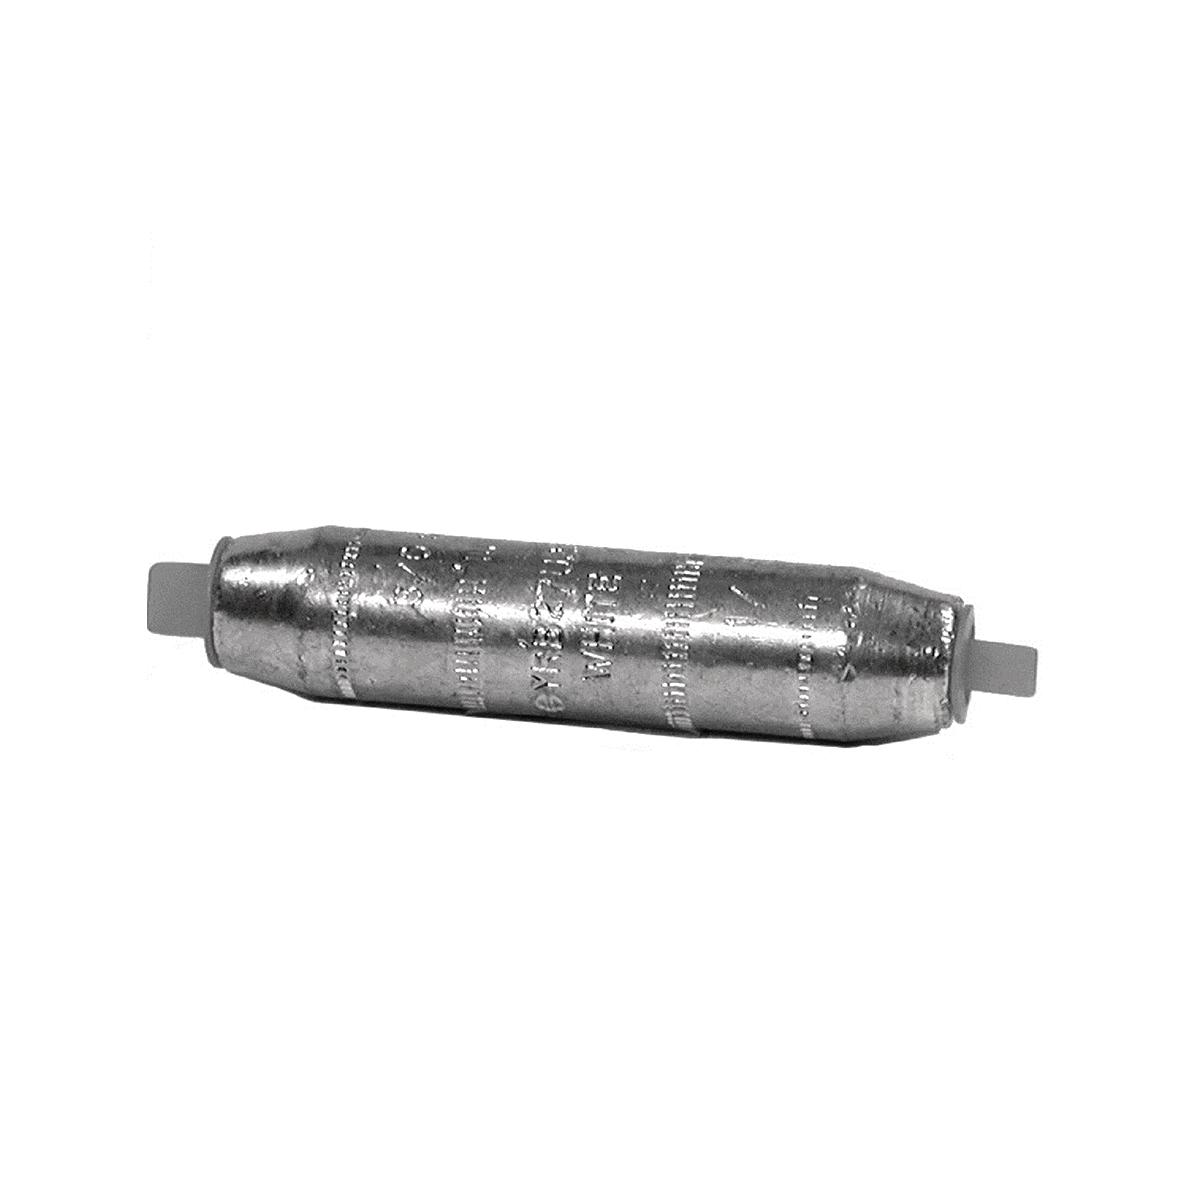 Hubbell YRB31U27 Aluminum Electro tin plated reducer. 